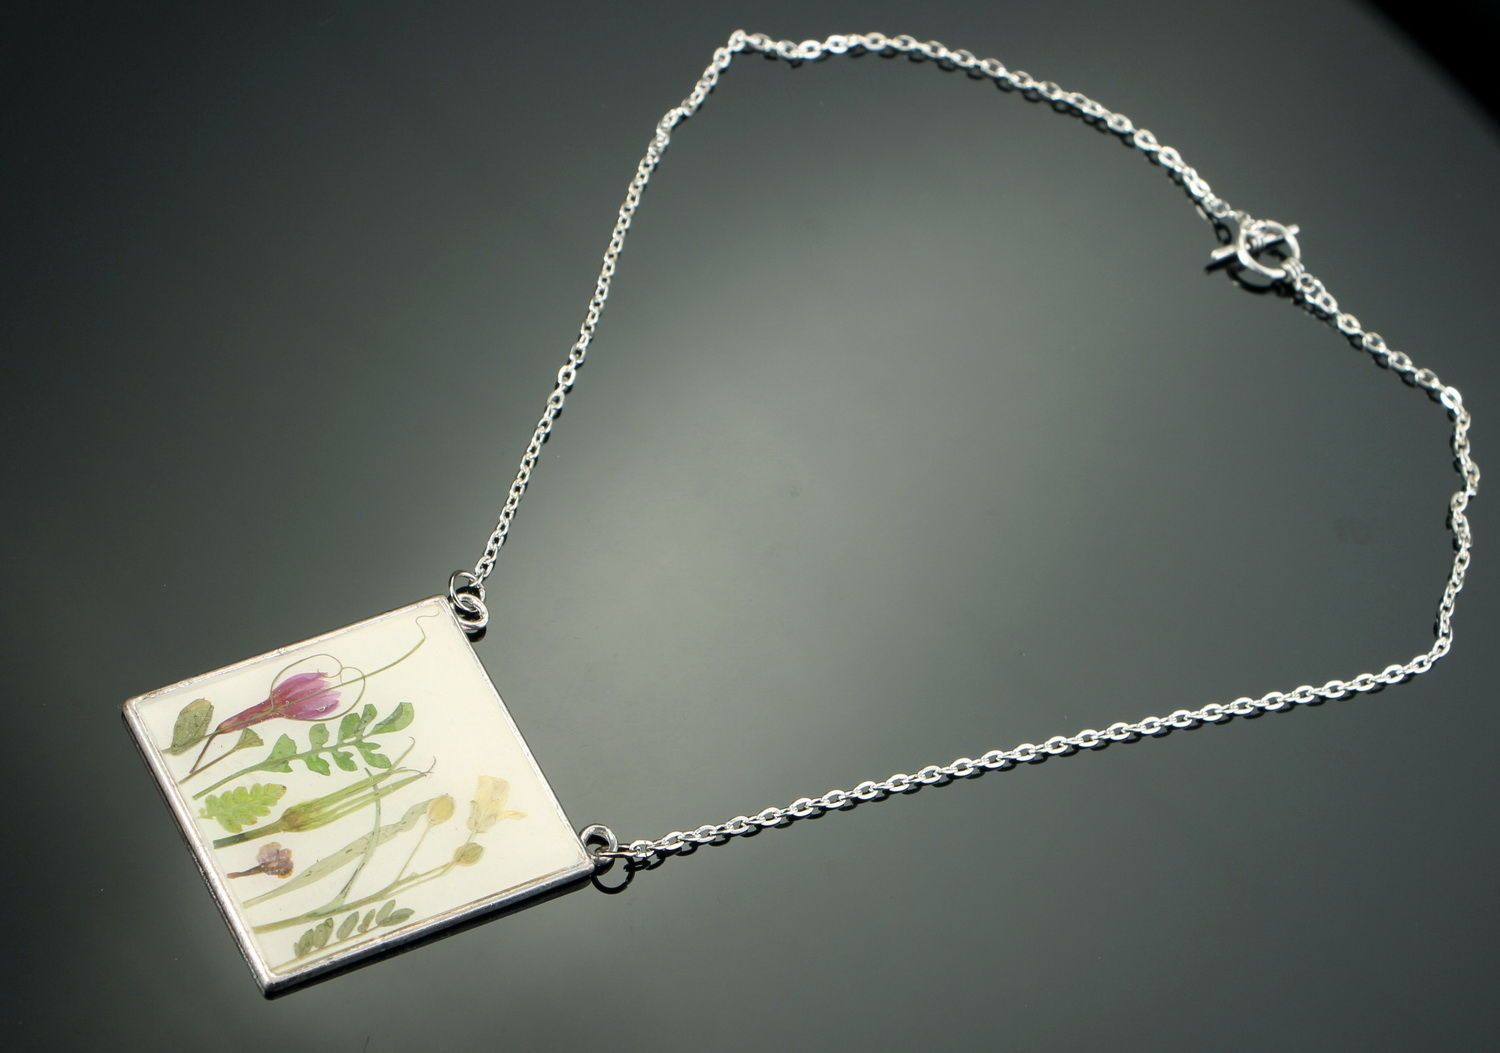 Necklace made of flower arrangement, coated with epoxy resin photo 2